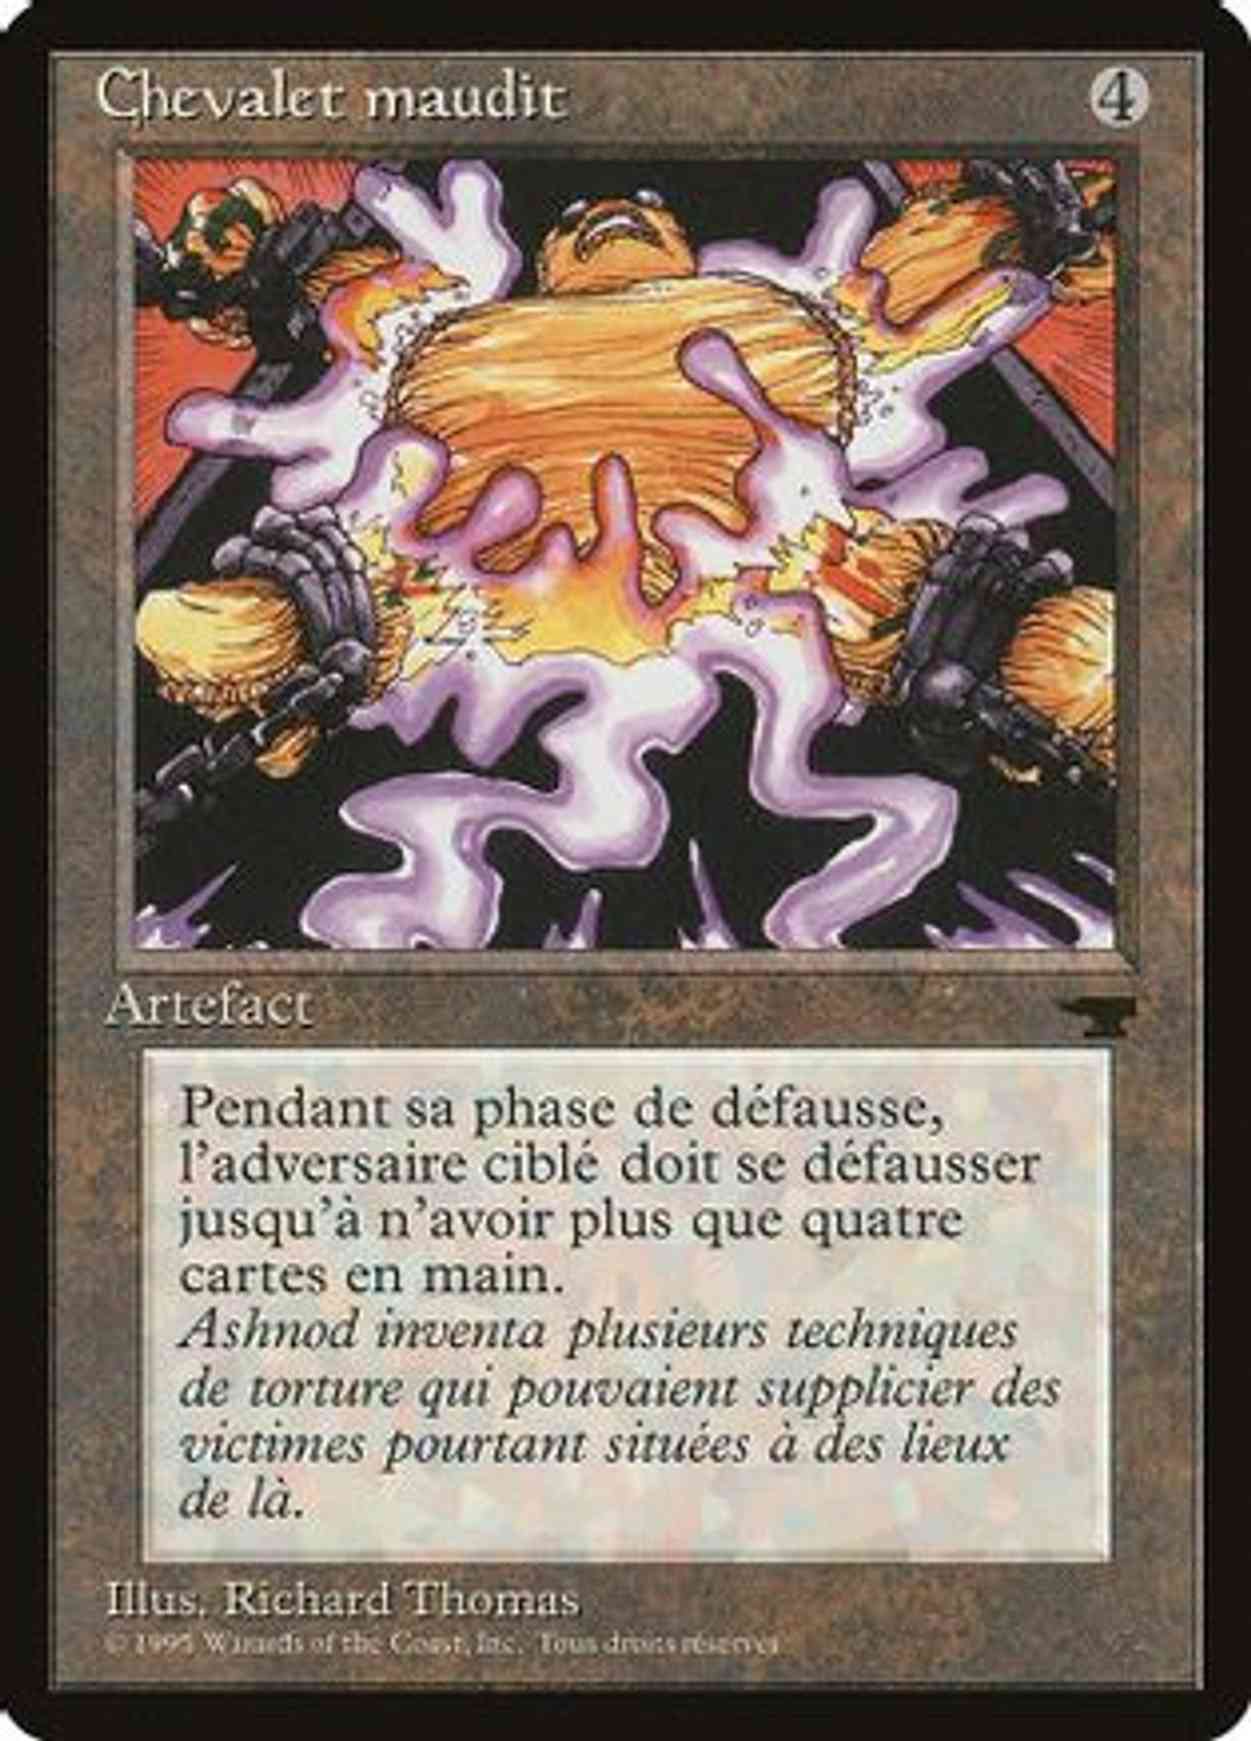 Cursed Rack (French) - "Chevalet maudit" magic card front